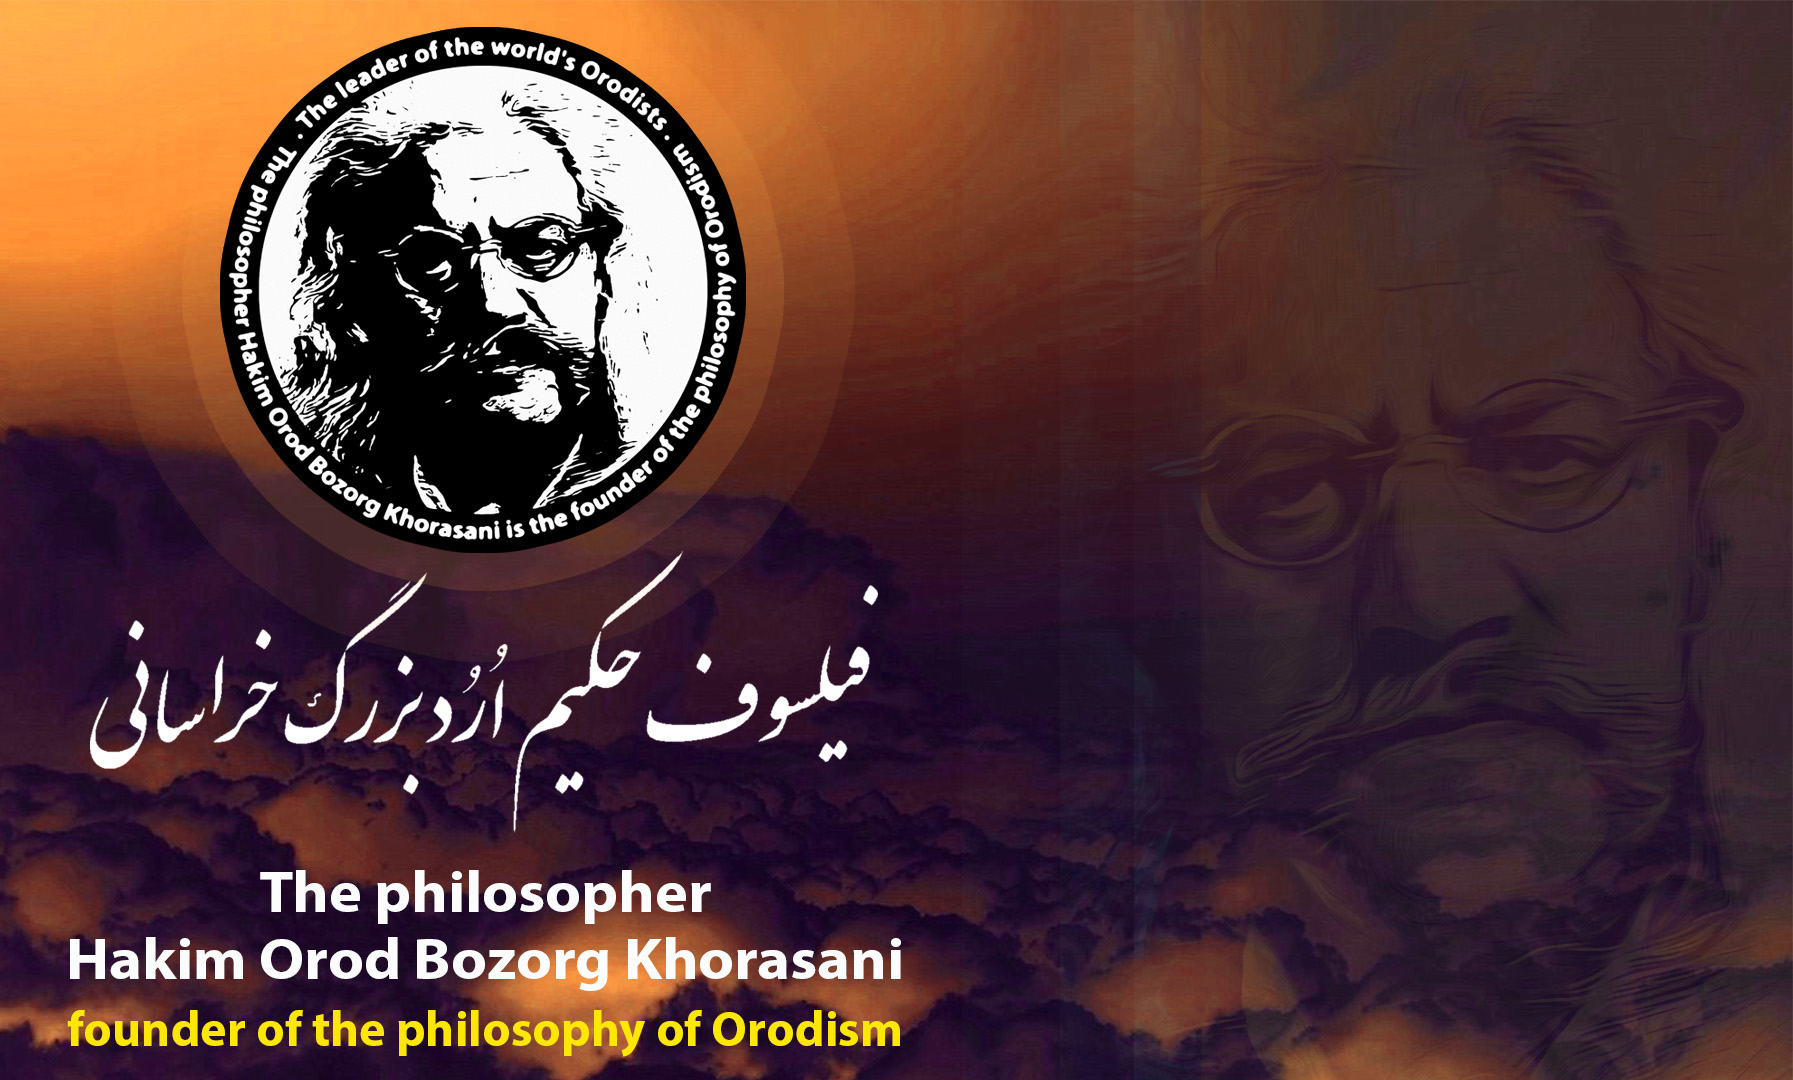  43 Inspiring Quotes By The Philosopher Hakim Orod Bozorg Khorasani That Will Serve As Food For Thought Japan_7_